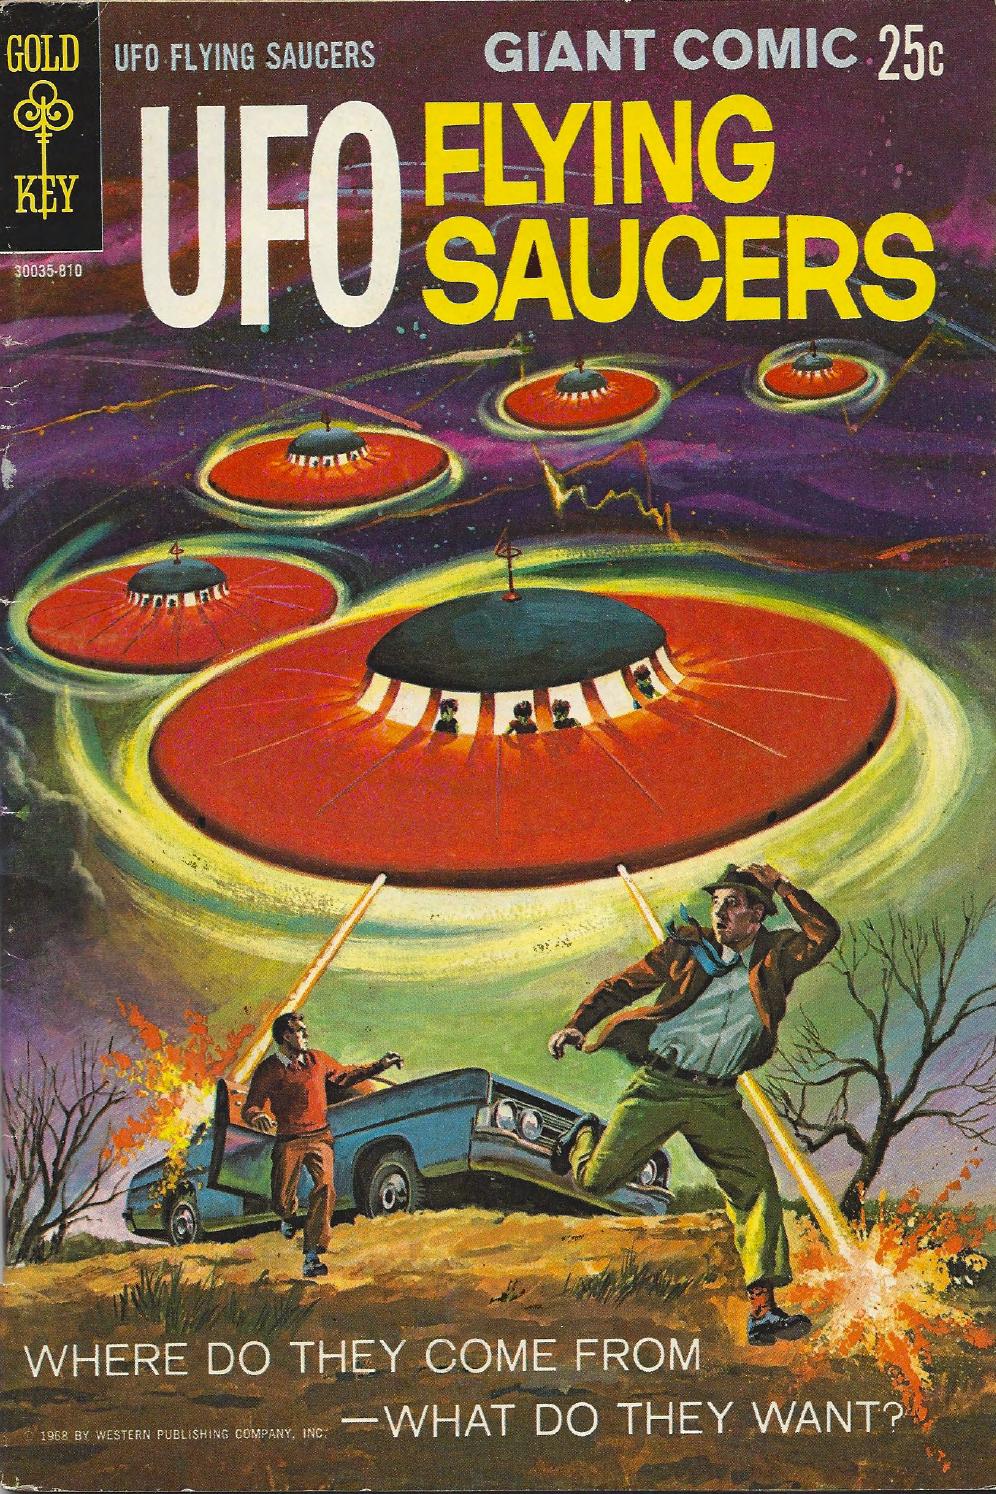 Gold Key's "UFO Flying Saucers"